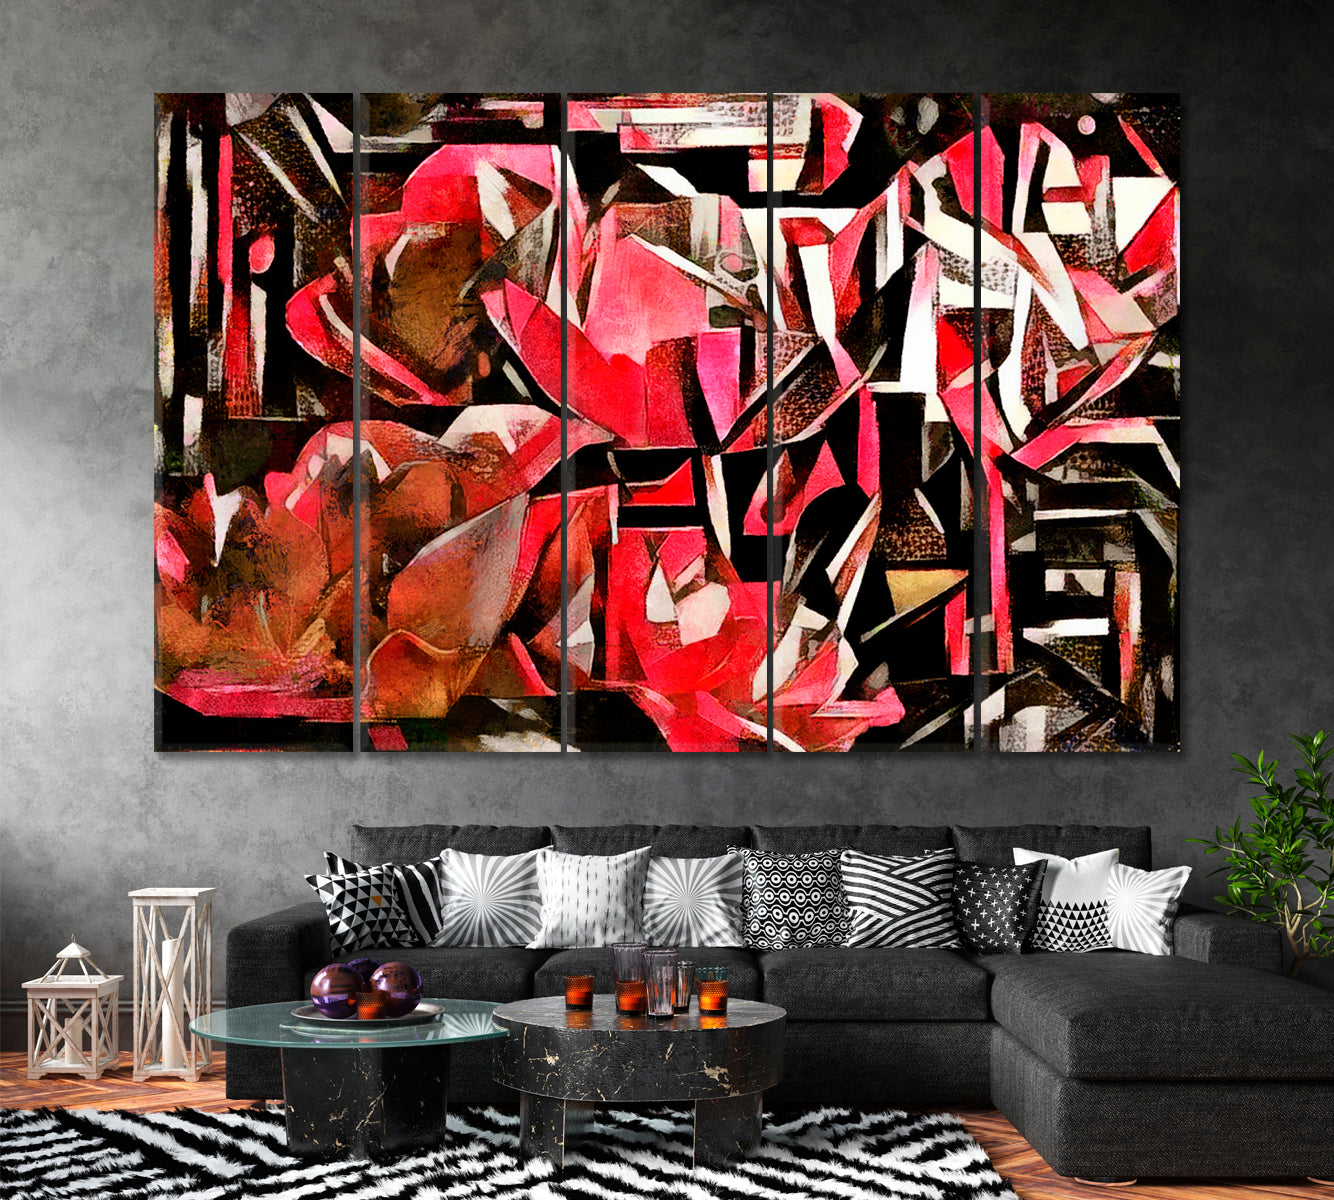 Peonies in Cubism Style Canvas Print ArtLexy 5 Panels 36"x24" inches 